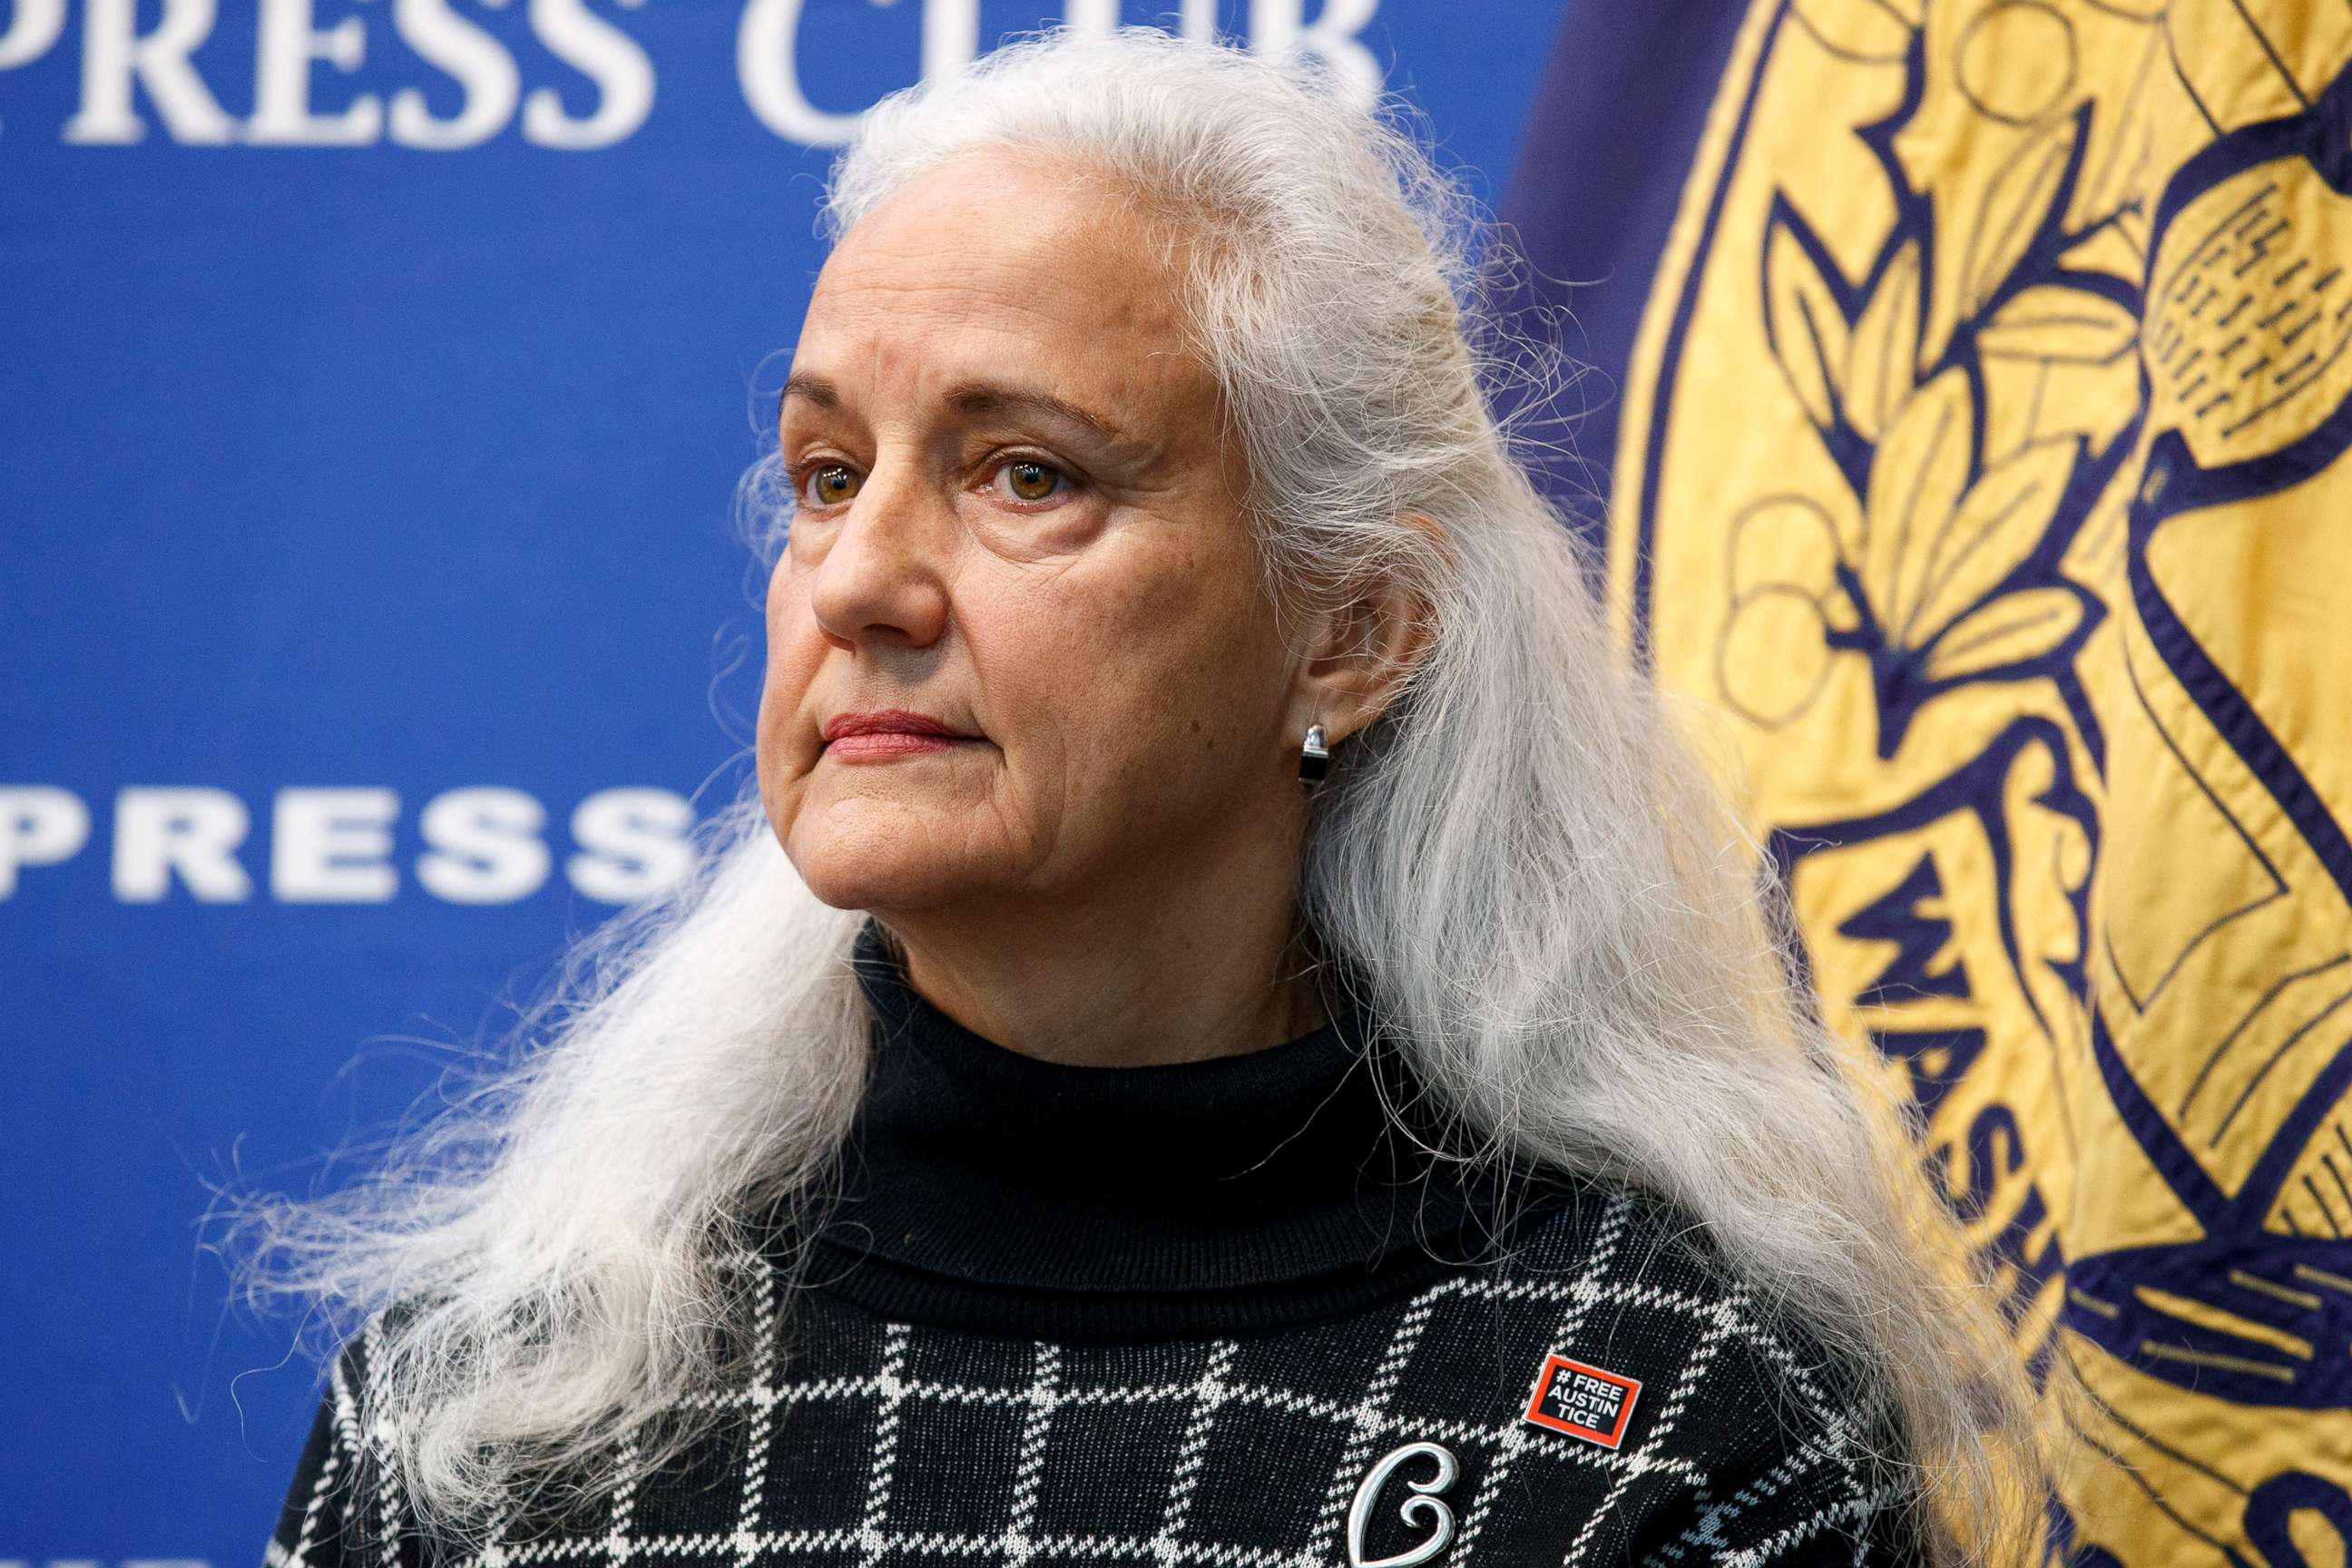 PHOTO: Debra Tice, the mother of detained journalist Austin Tice, listens as she is introduced before speaking about her son's detention at the National Press Club in Washington, Jan. 27, 2020.